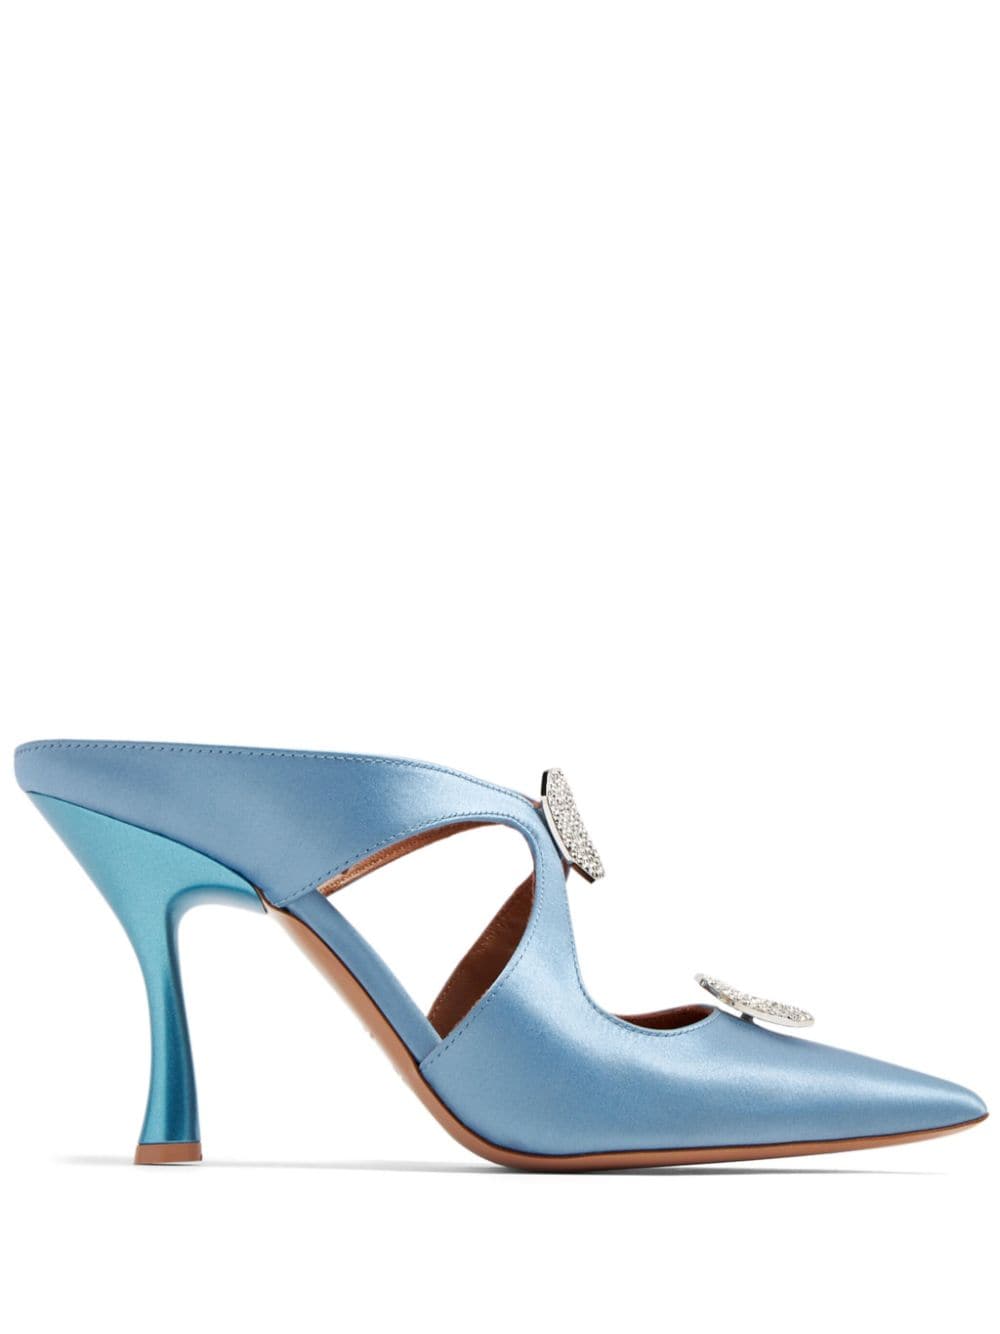 Malone Souliers Tina 90mm satin mules - Blue von Malone Souliers